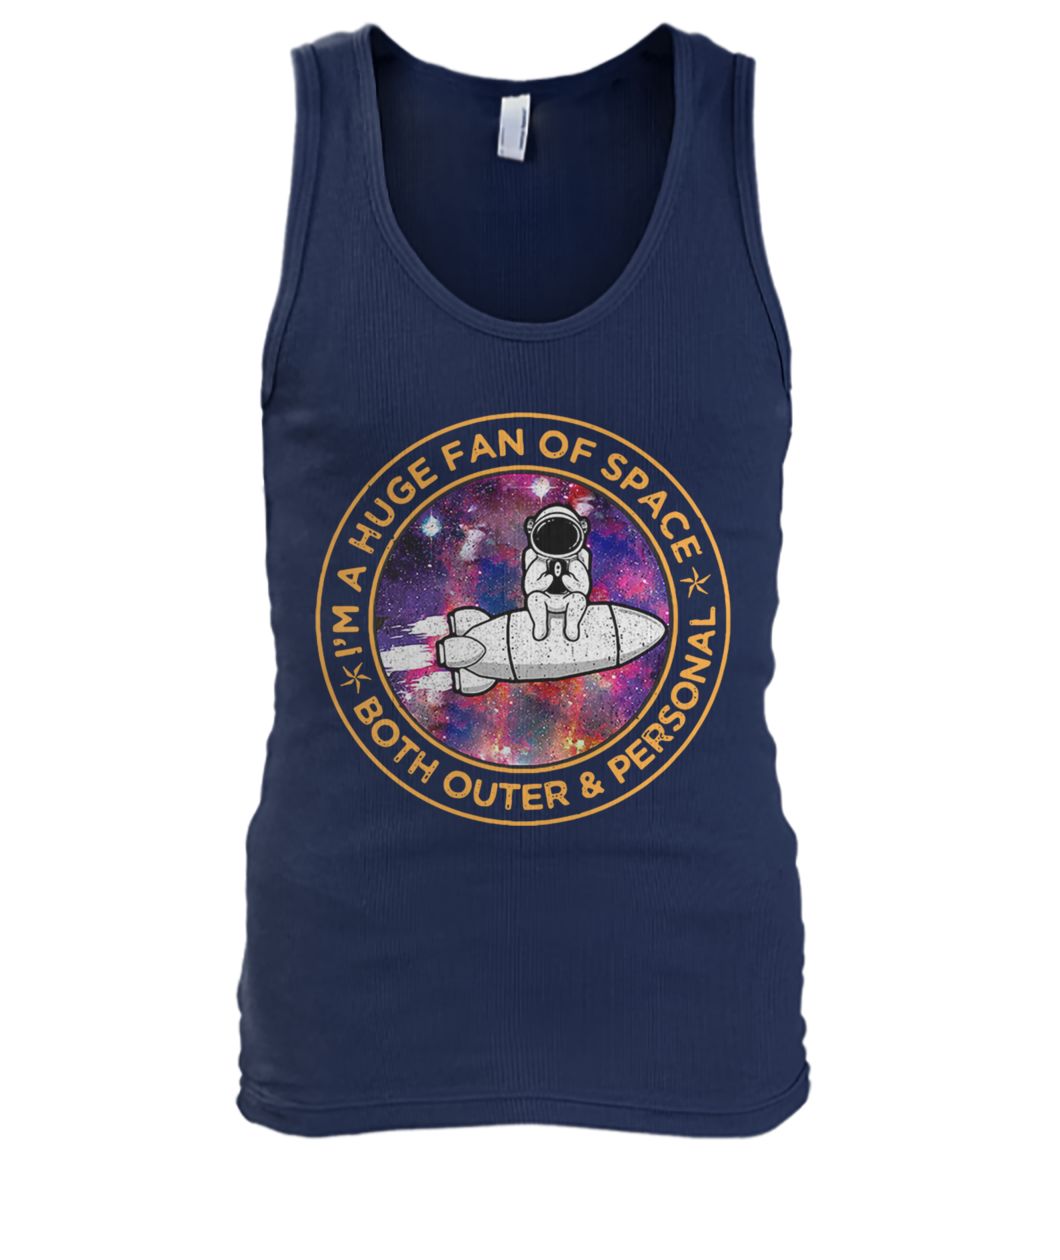 Astronaut I'm a huge fan of space both outer and personal men's tank top